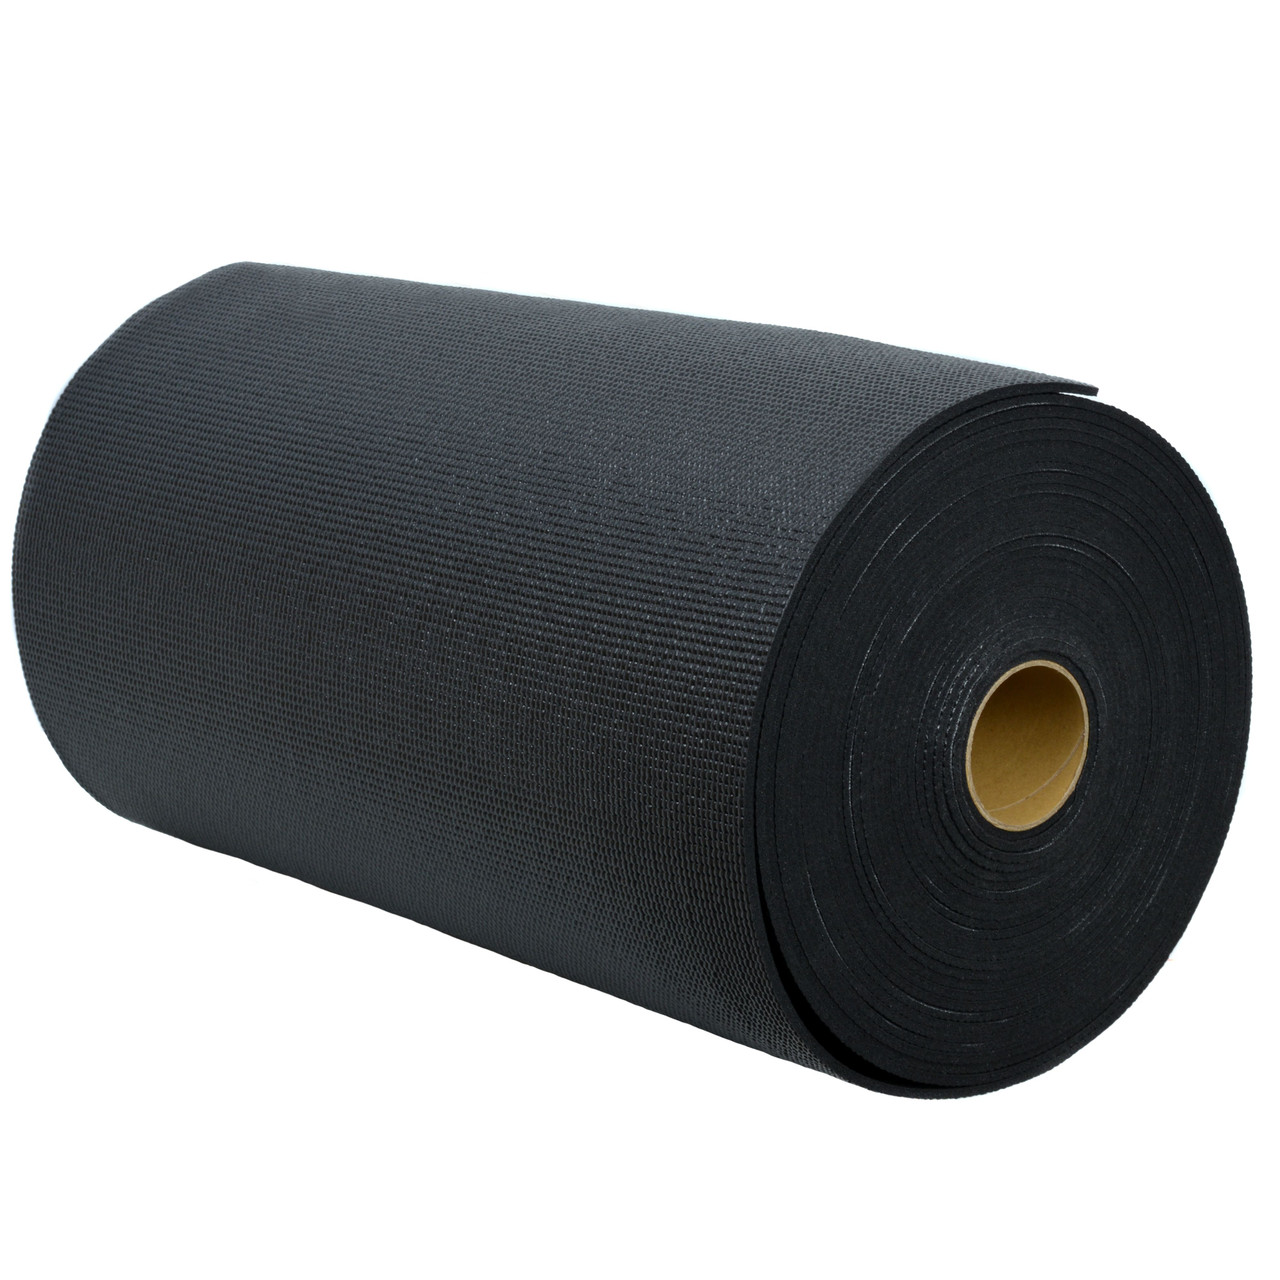 The ONE Yoga Mat 4.5mm